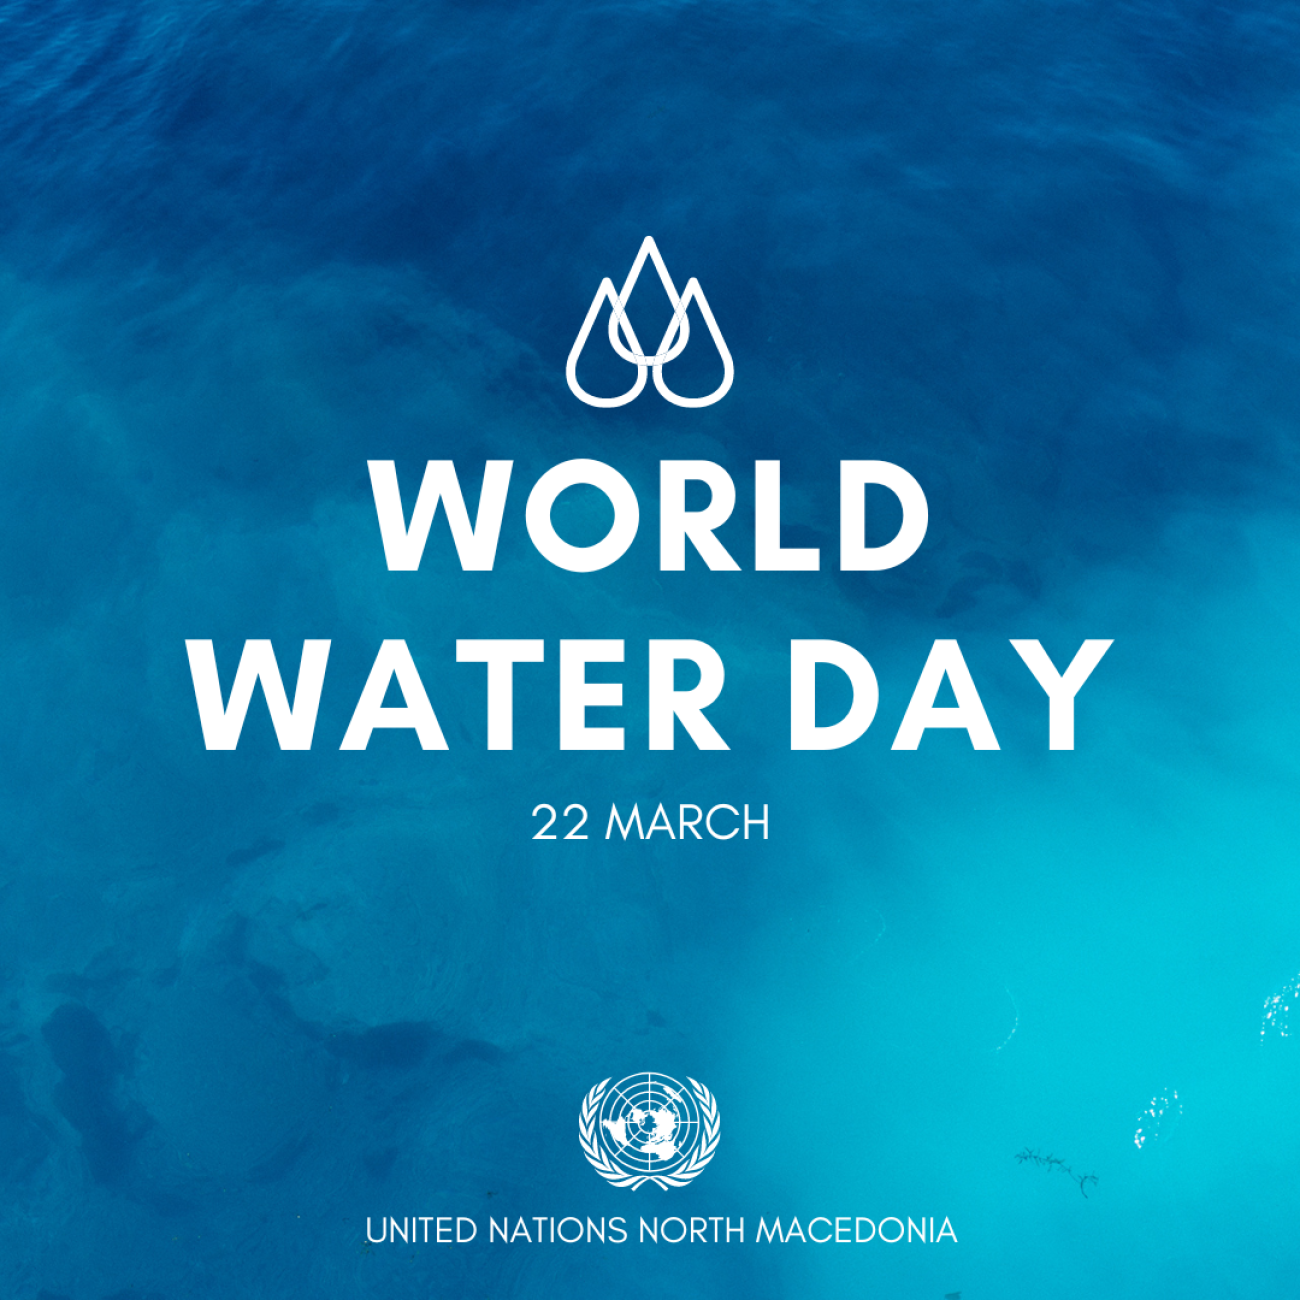 WORLD WATER DAY - Welcome to Biofemgroup